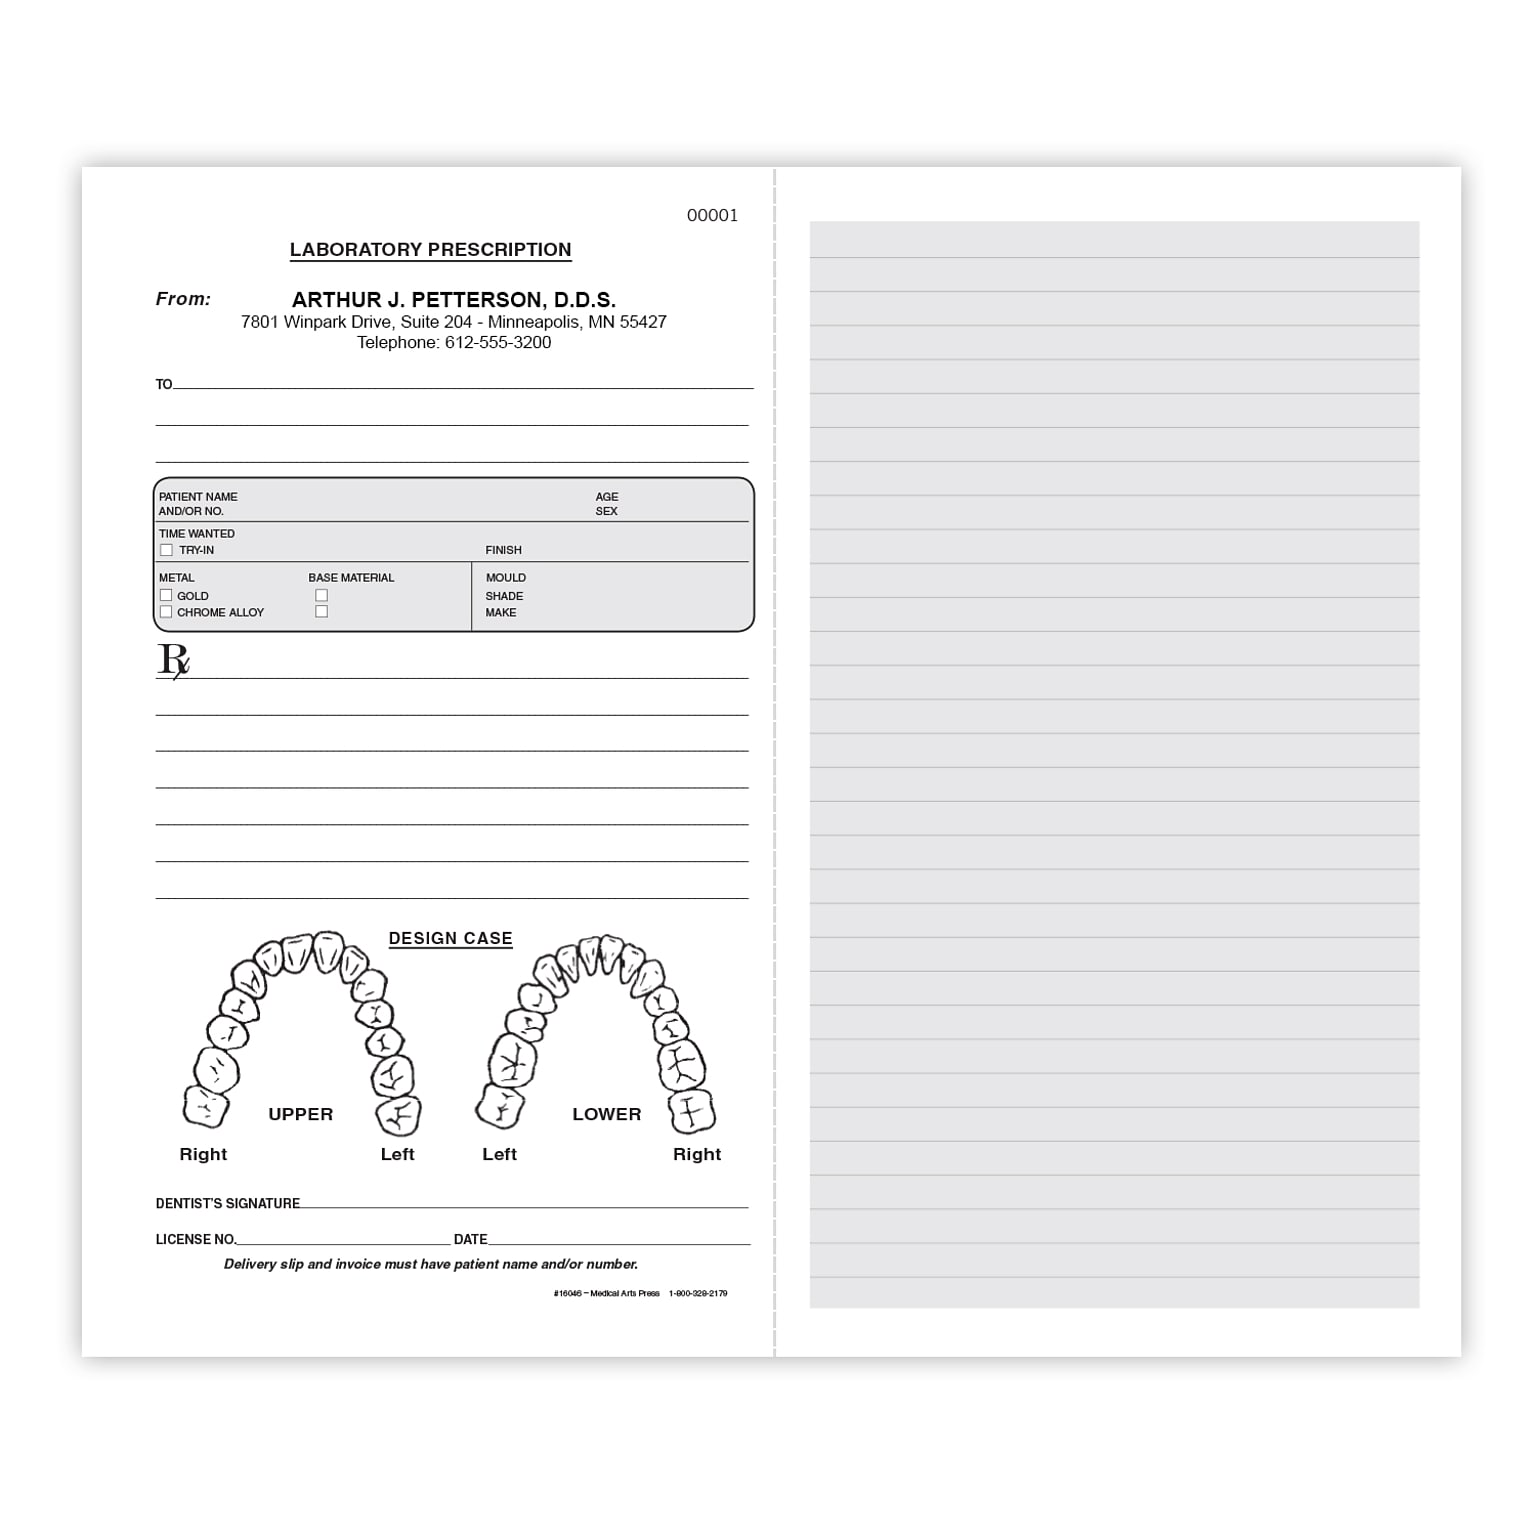 Numbered Dental Lab RX Pads, Single Copy, 25 Pads per Pack